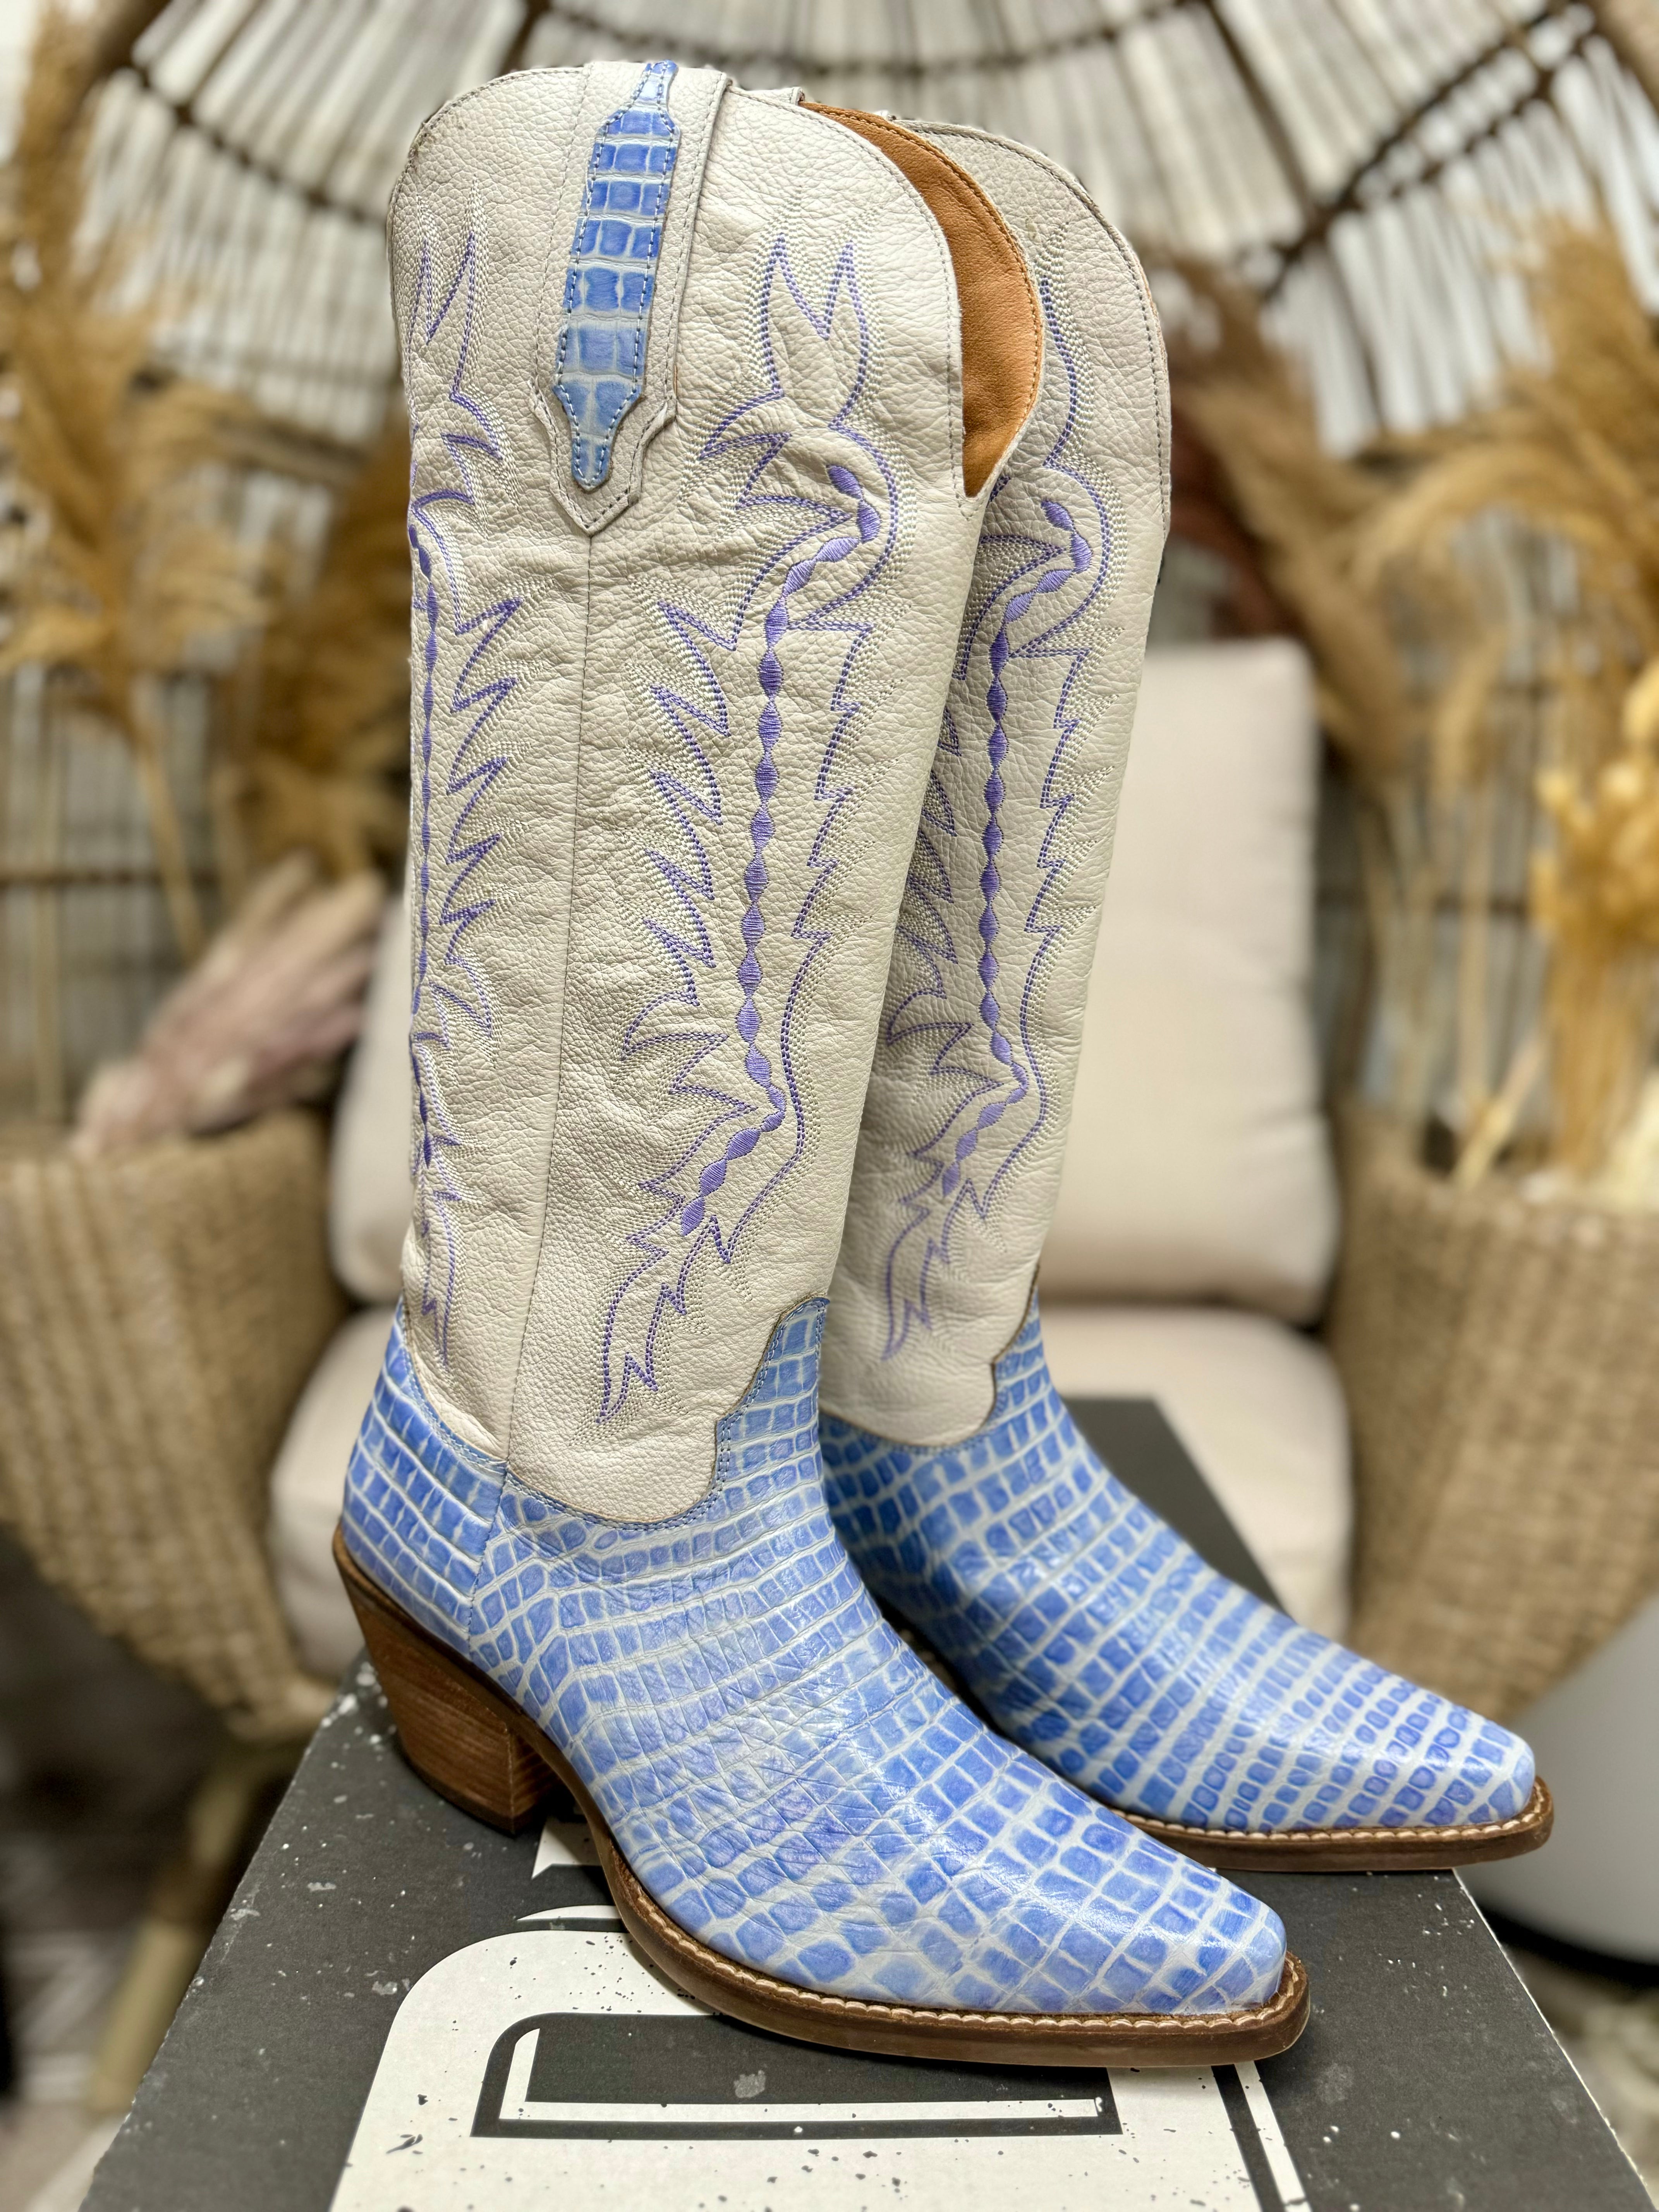 *DISCONTINUED* Dingo | High Lonesome Leather Cowboy Boots in Periwinkle Purple - Last Chance Size 9.5 - Giddy Up Glamour Boutique